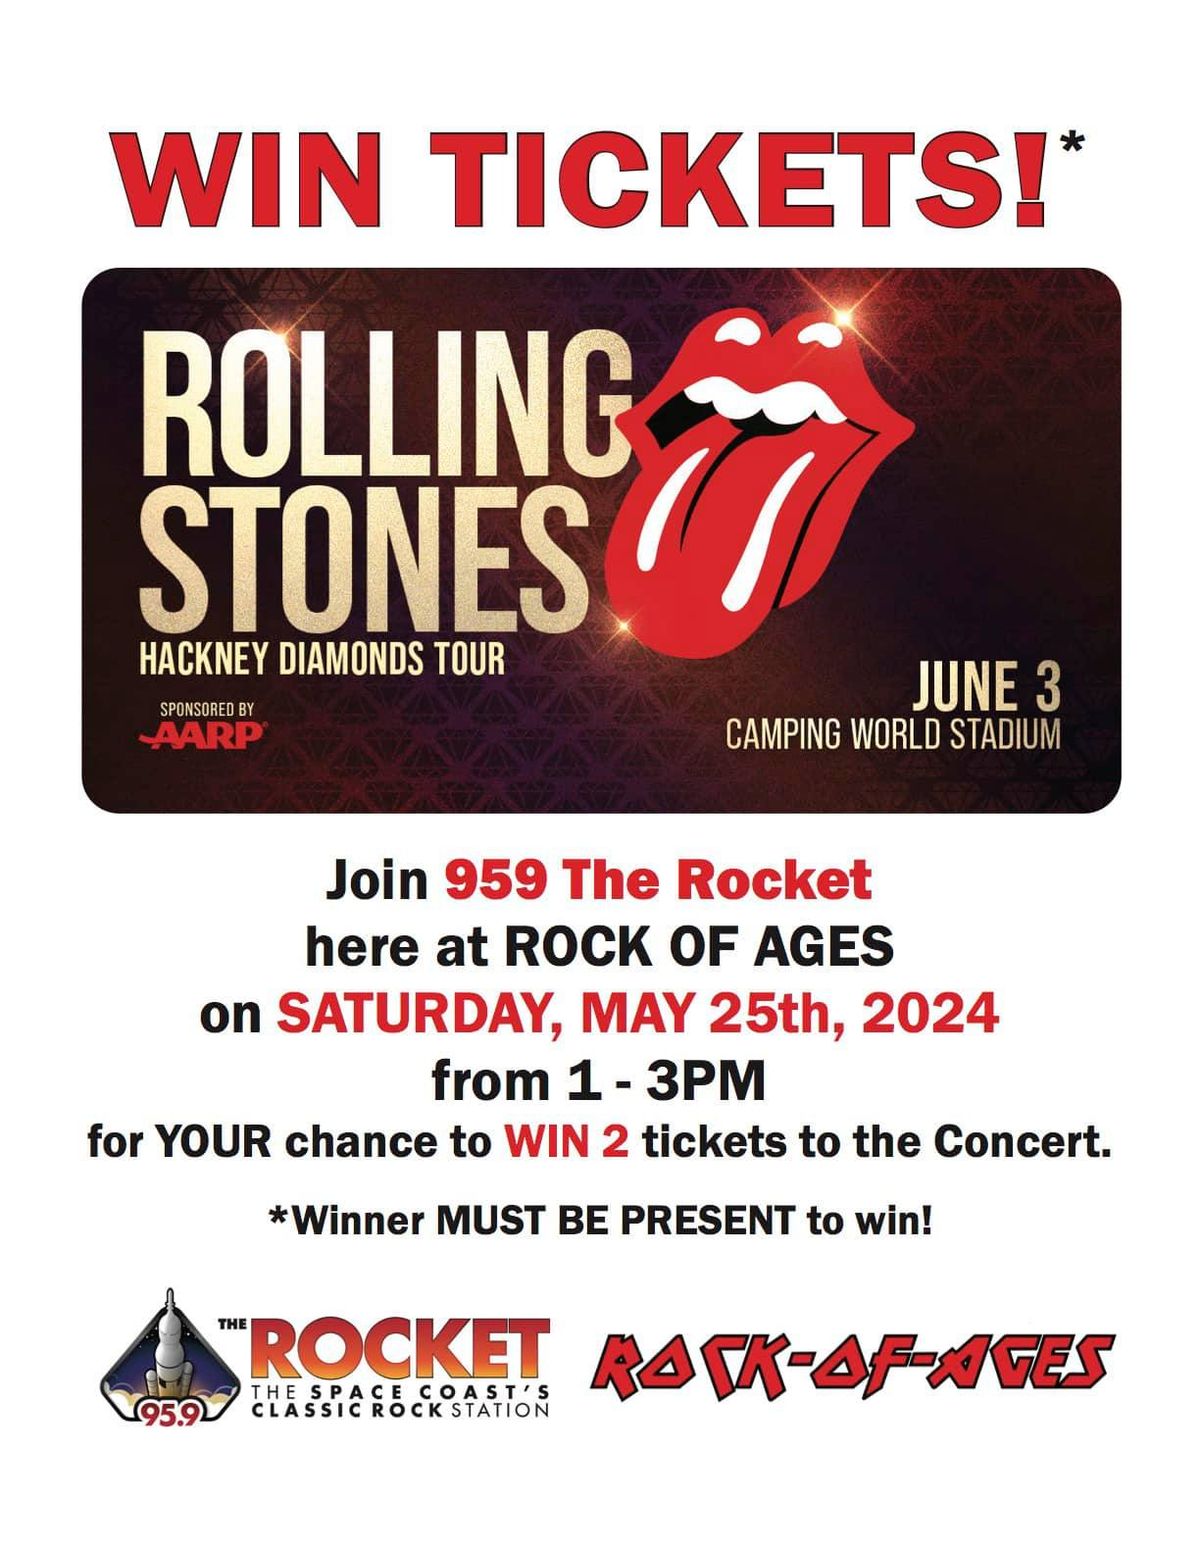 Rolling Stones tickets giveaway.